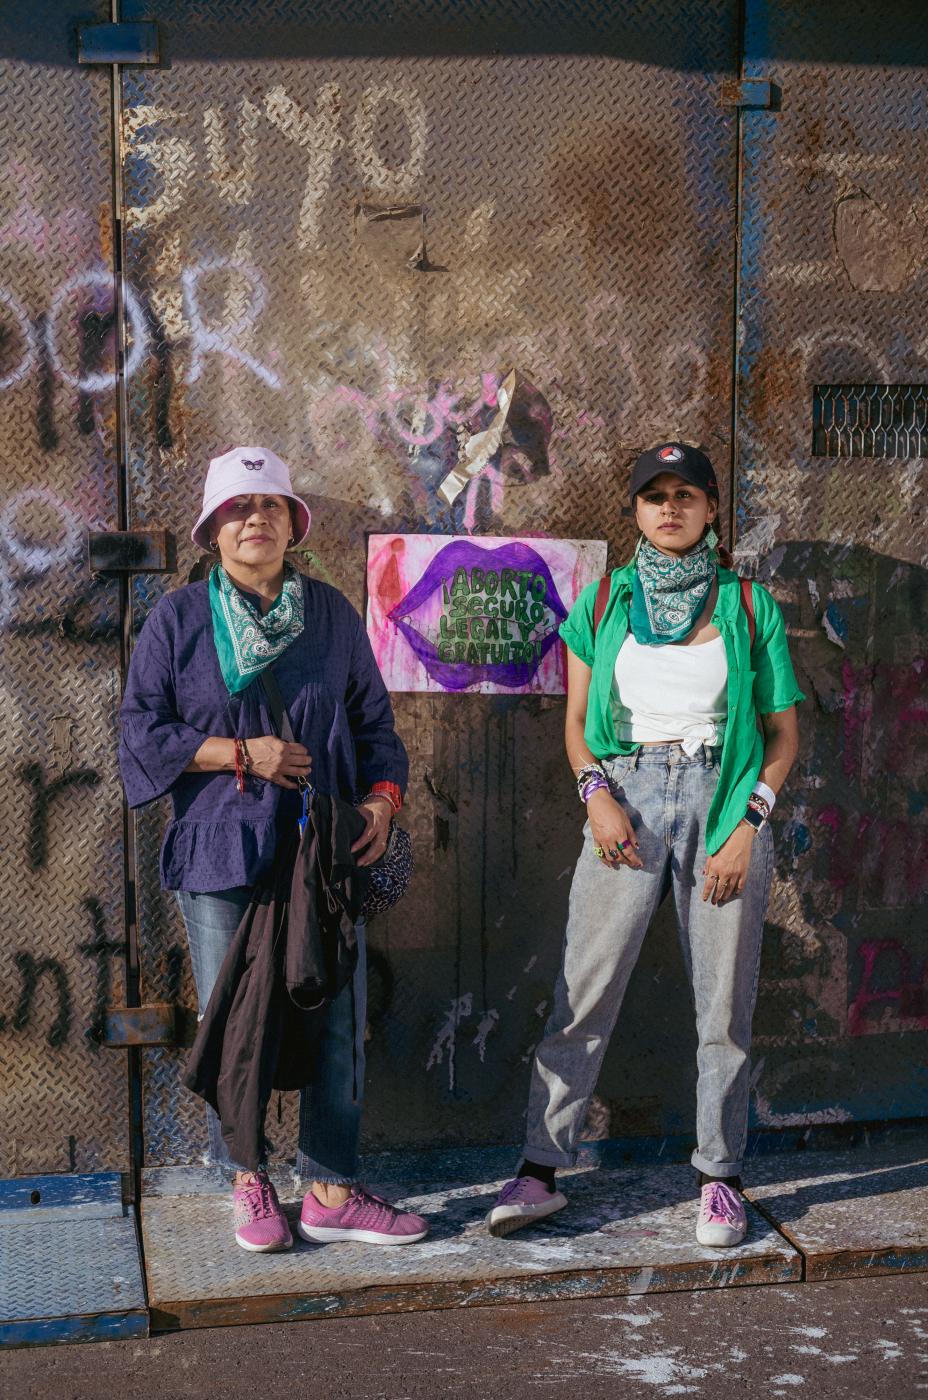 Fuego Feminista - Miriam and Rene (mother and daughter), pose for a...